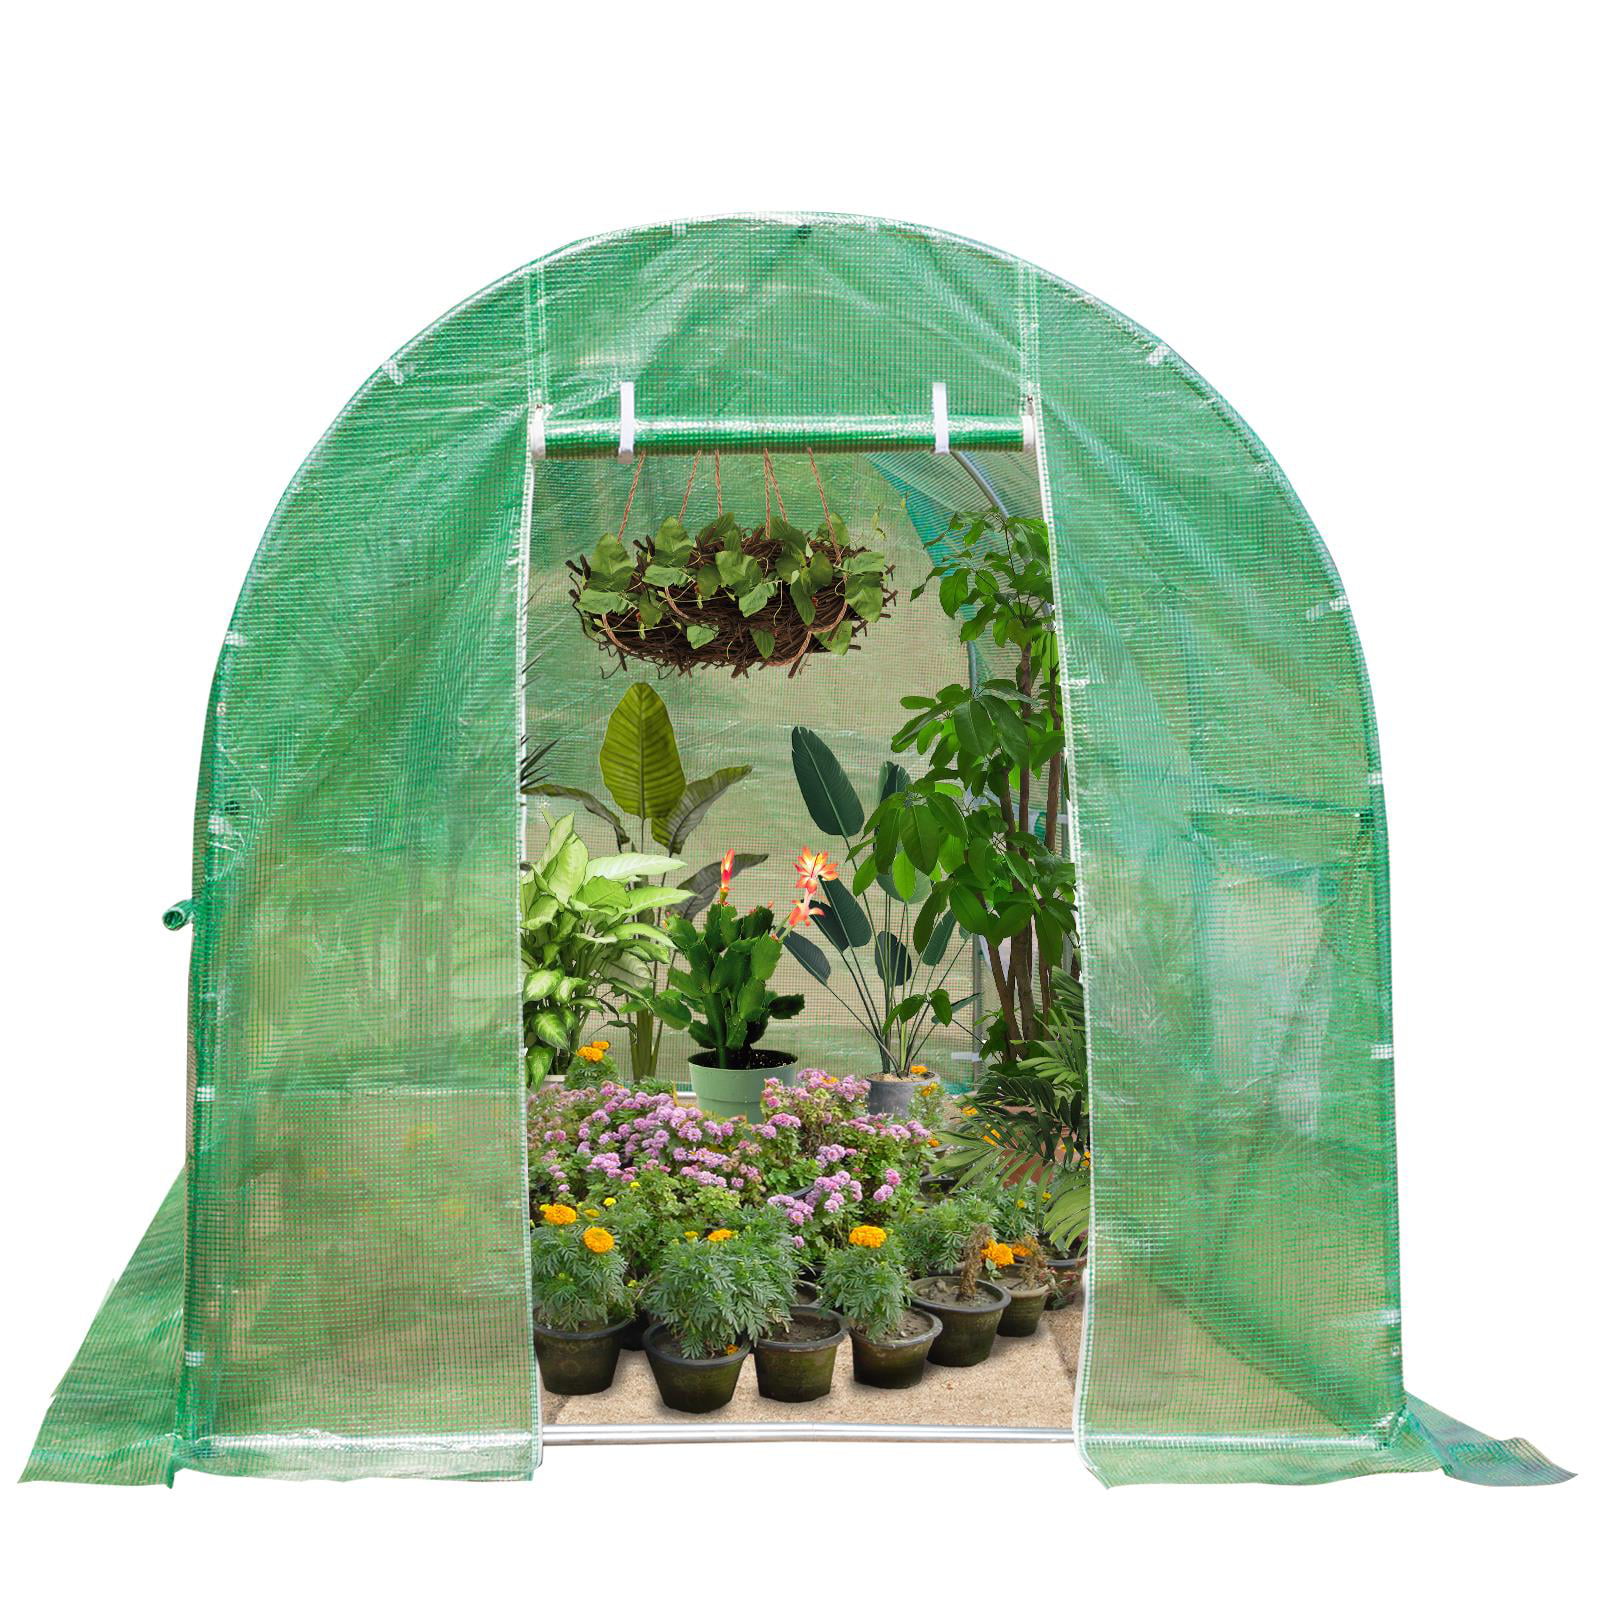 Details about   Quictent White Greenhouse 10x9x8 Outdoor Walk In Green House Gardening Planter 